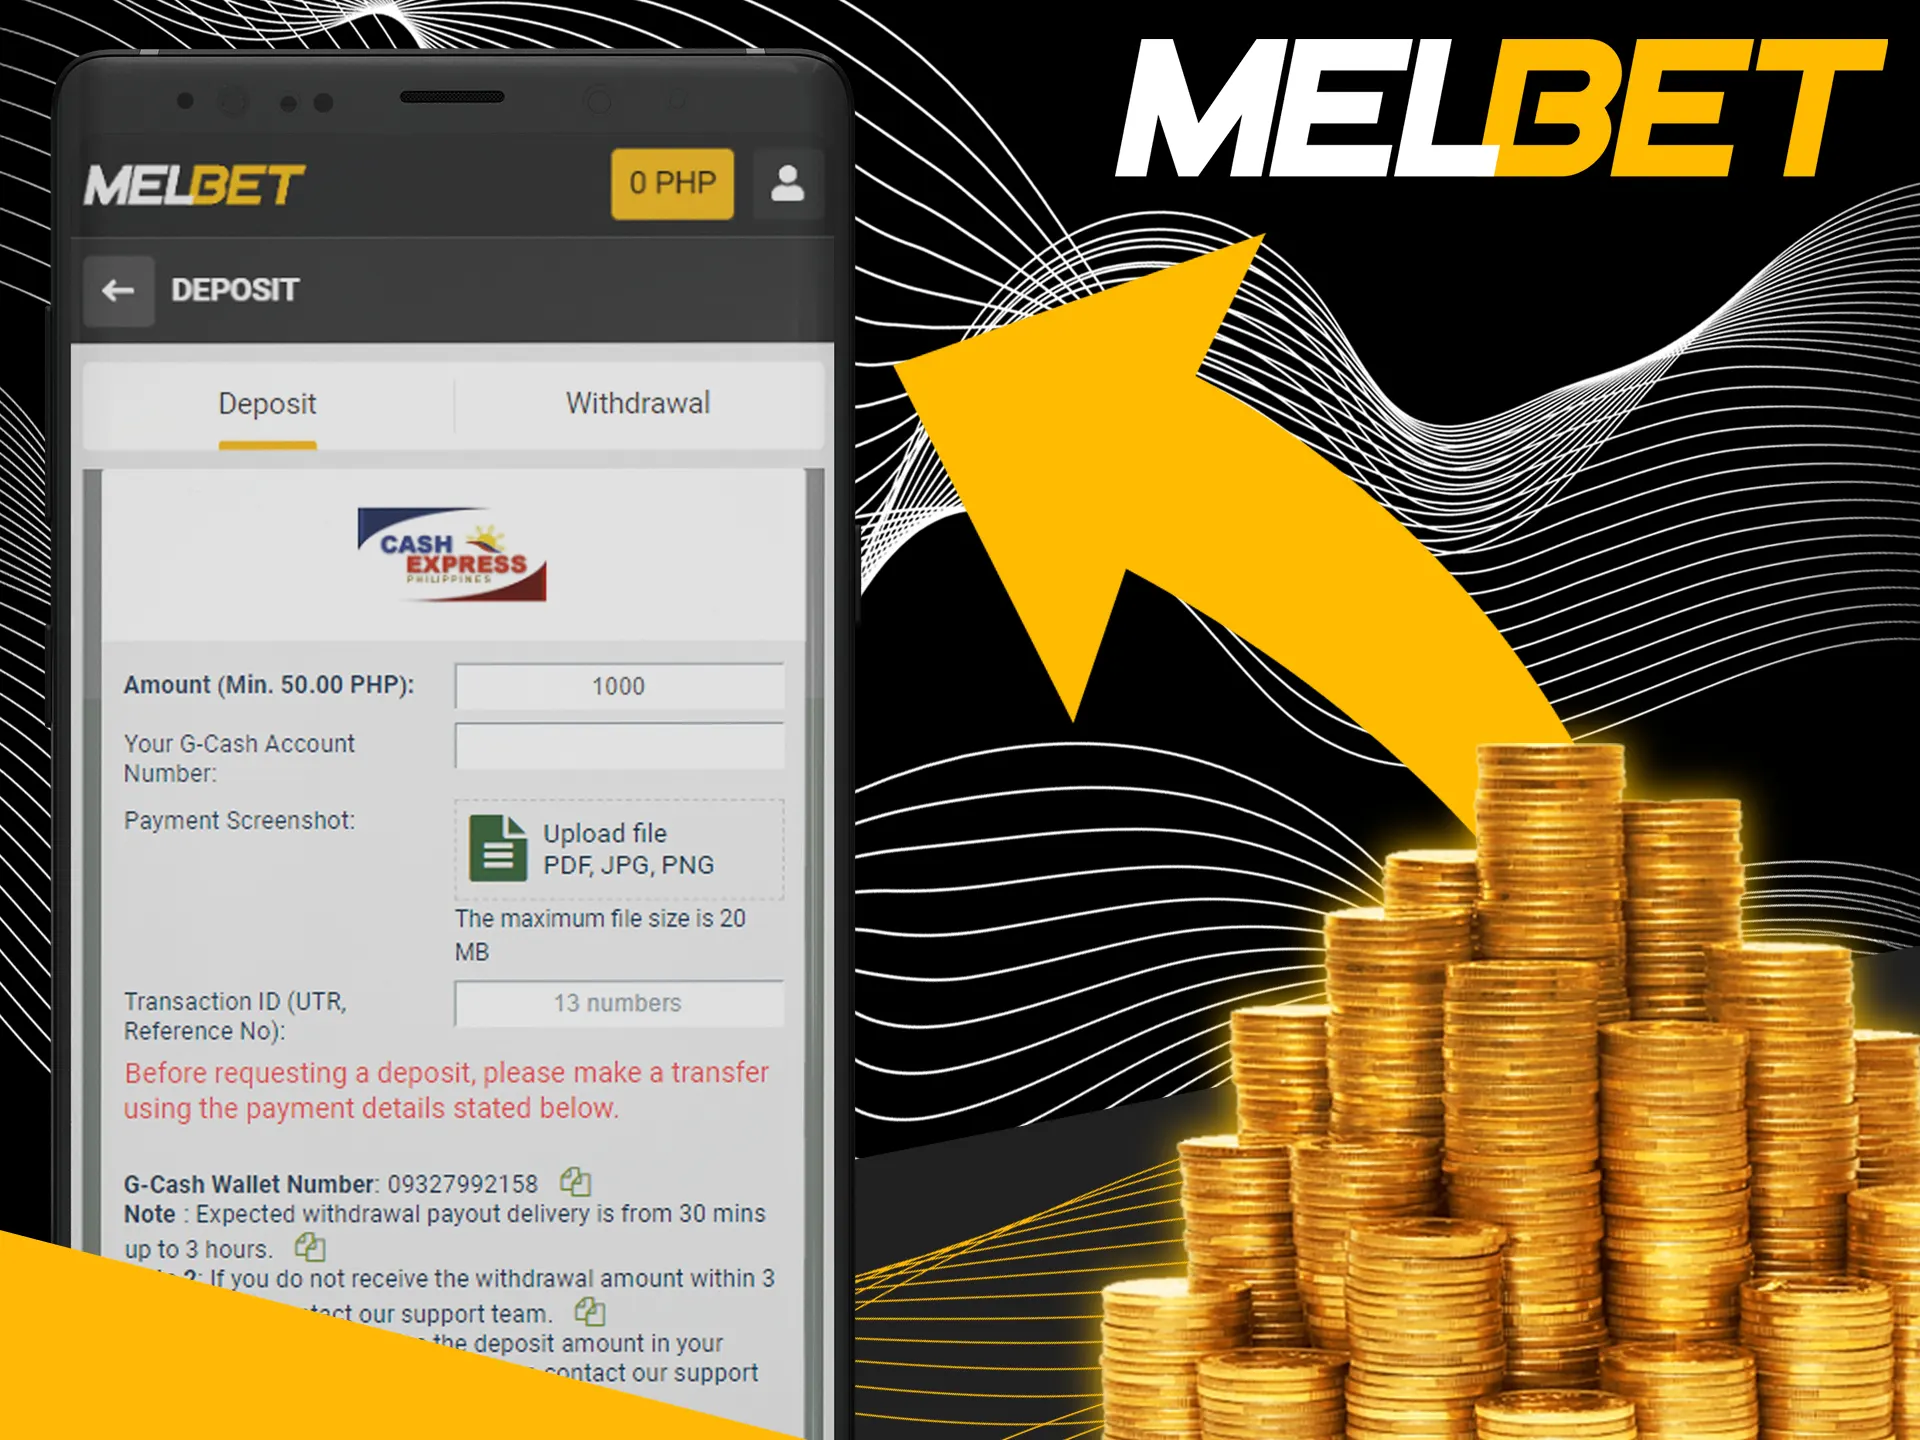 Top 10 Betting Sites: Where to Place Your Bets Online